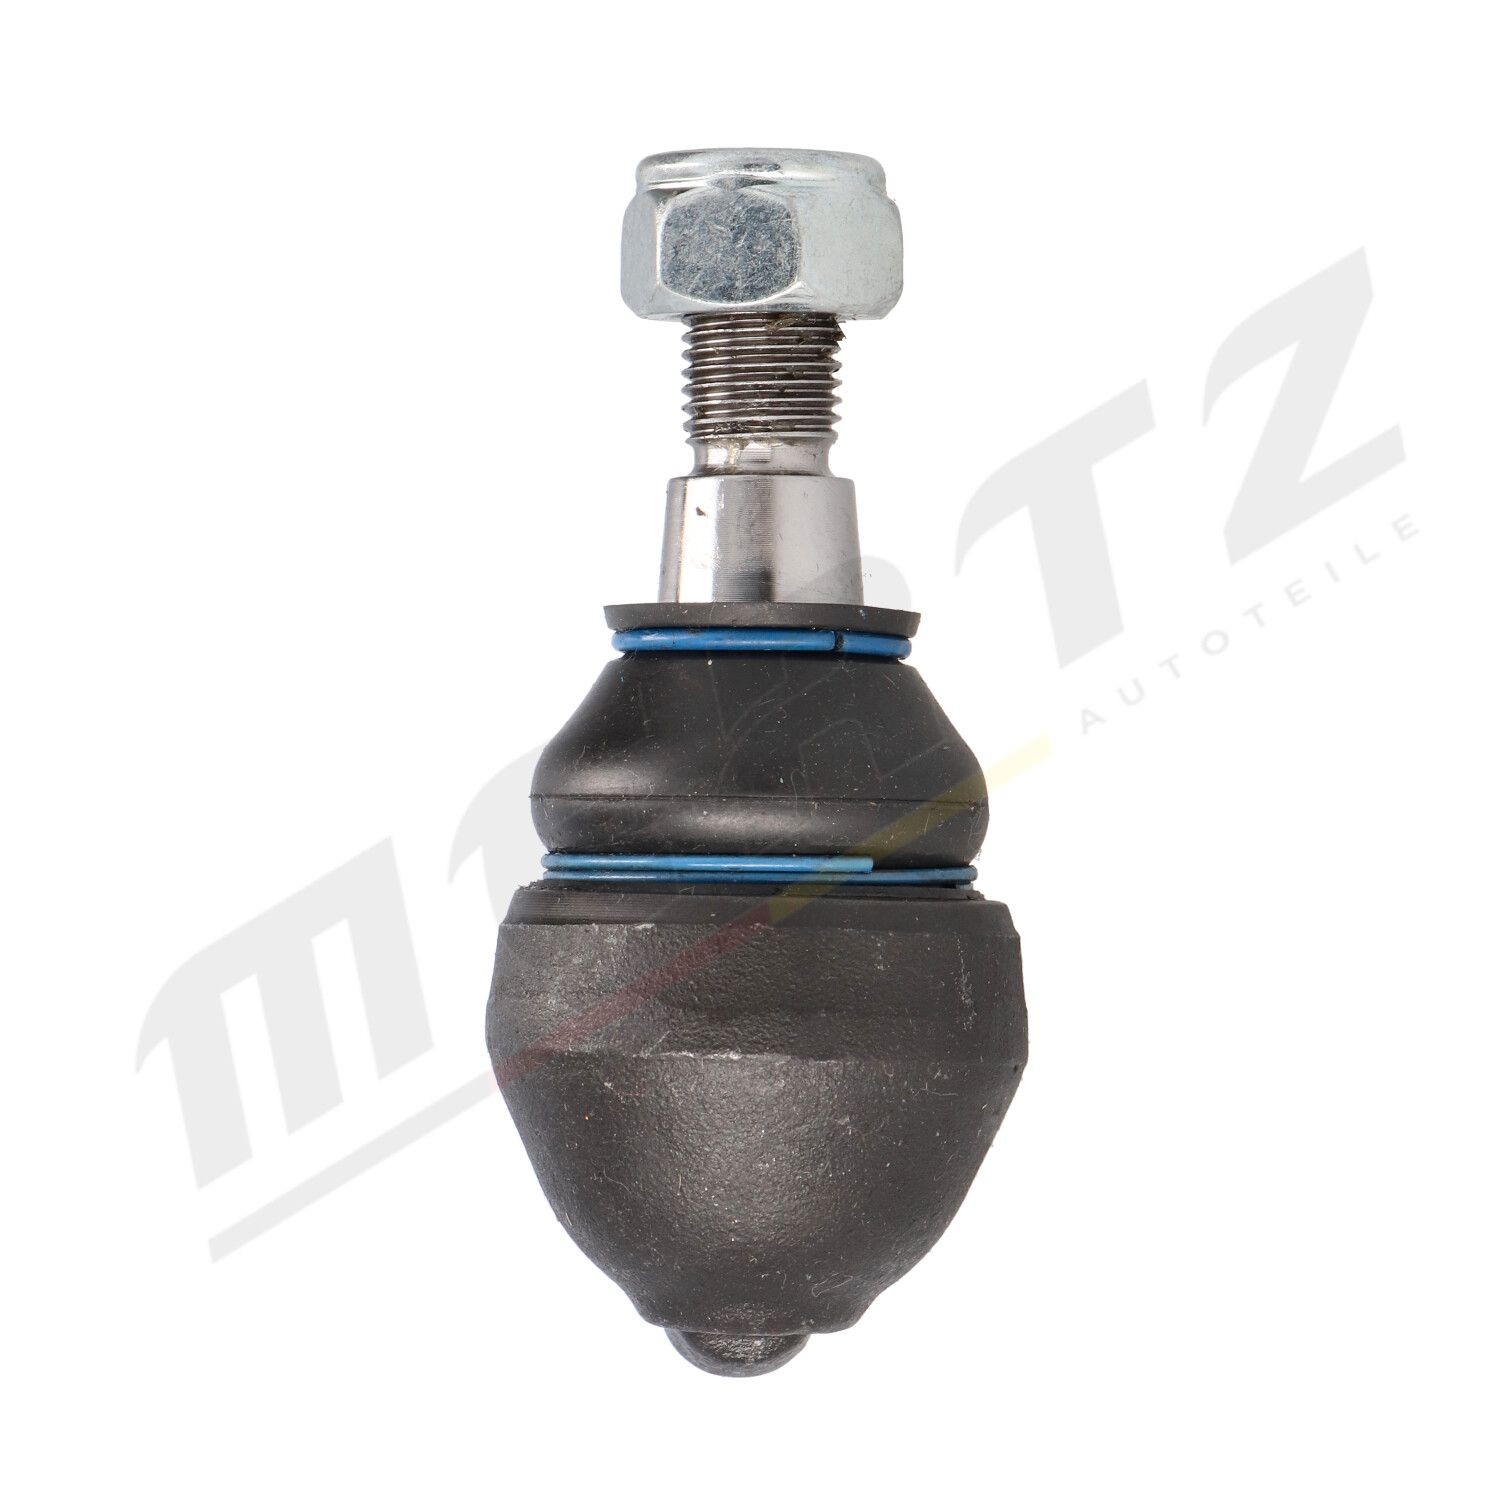 M-S0017 Suspension ball joint M-S0017 MERTZ Front Axle Left, Front Axle Right, Lower, with nut, M14x1,5mm